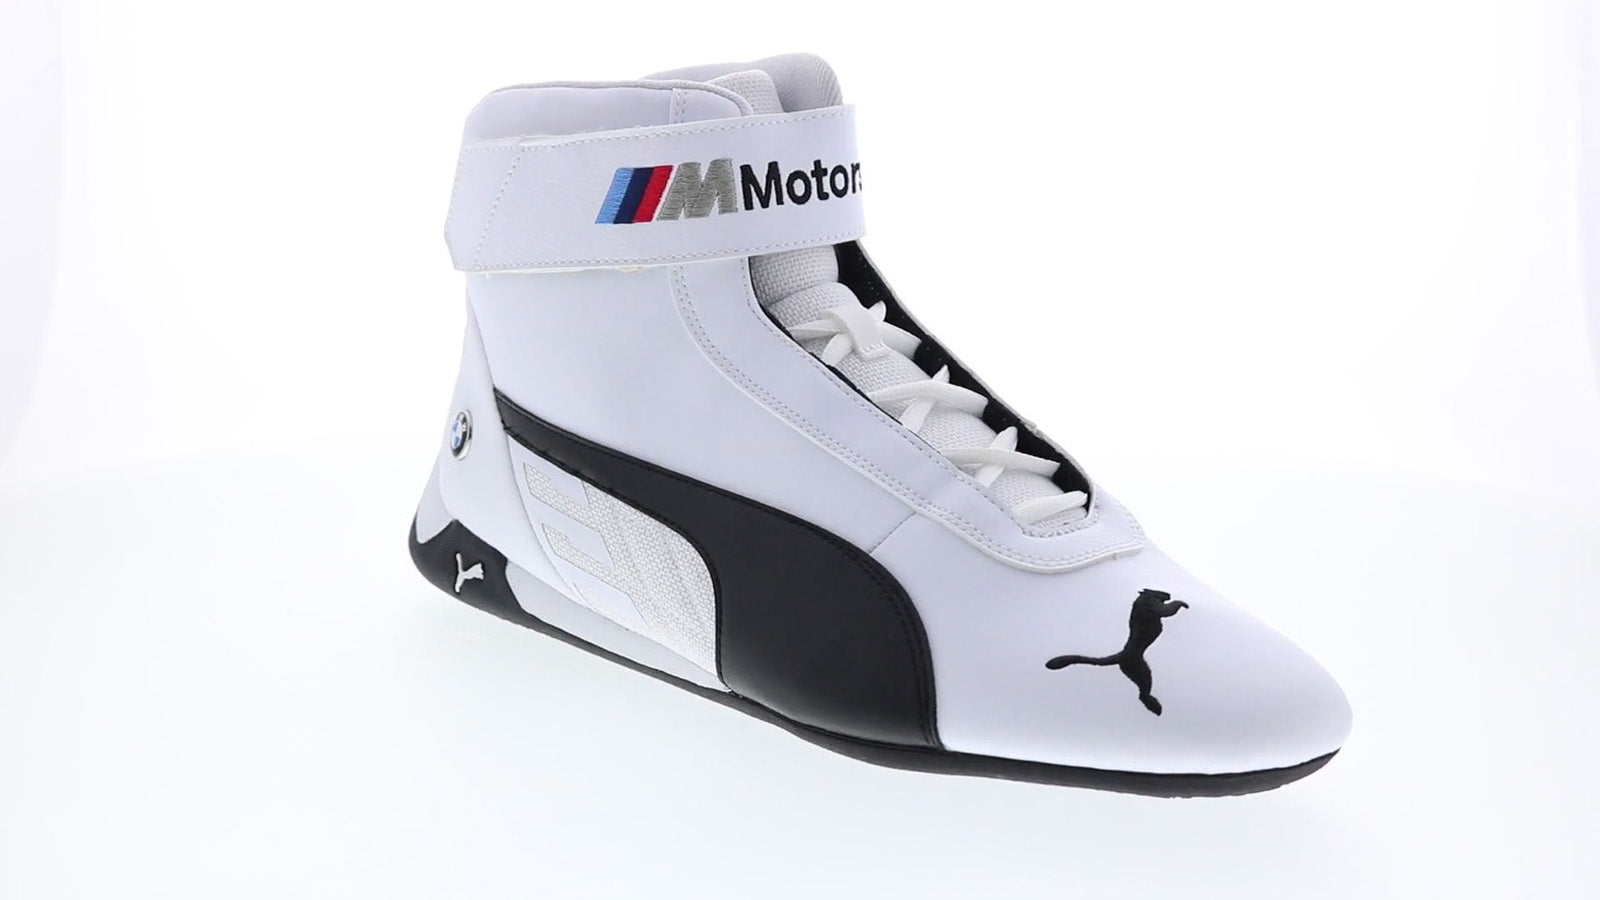 halen steak Oswald Puma BMW MMS R-Cat Mid Mens White Motorsport Inspired Sneakers Shoes 11.5 -  Ruze Shoes